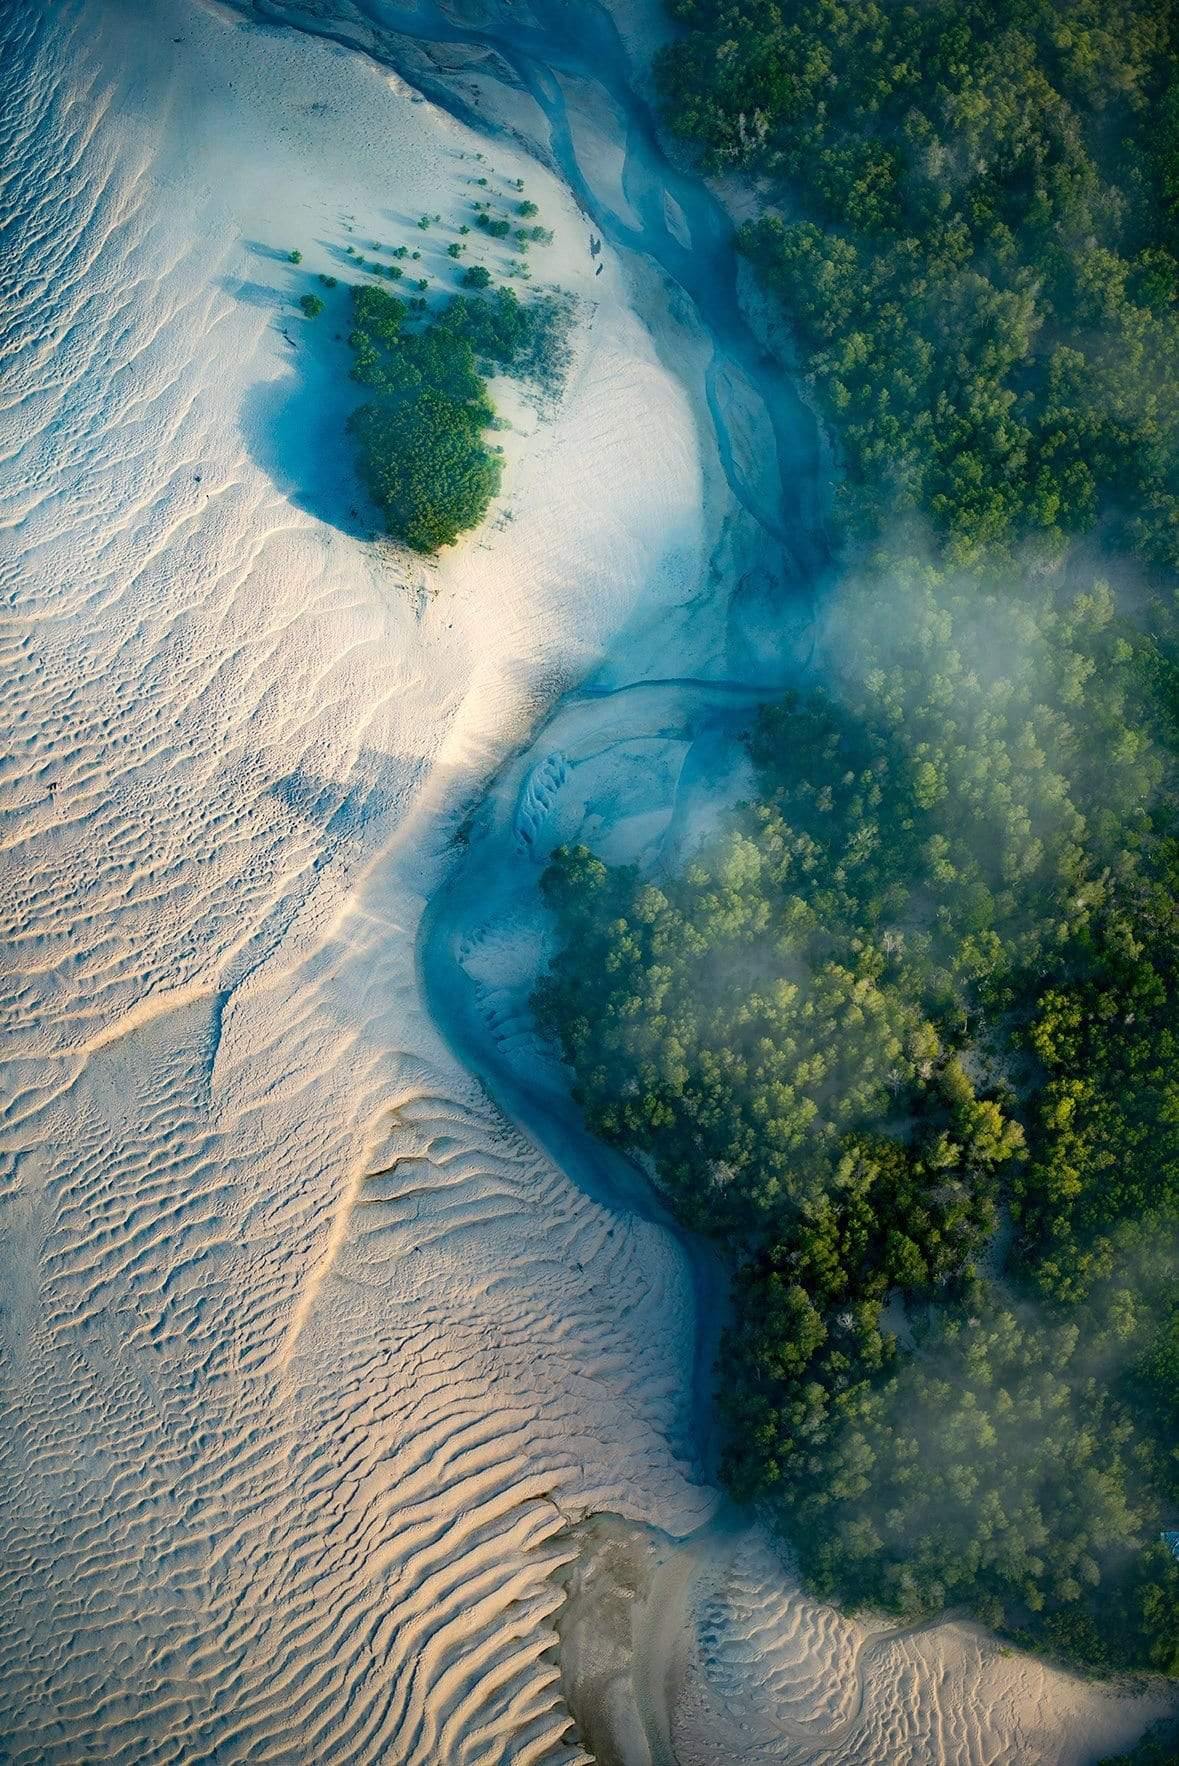 An aerial view of a desert-like area connecting with a dense greenery area vertically, Beach Mist